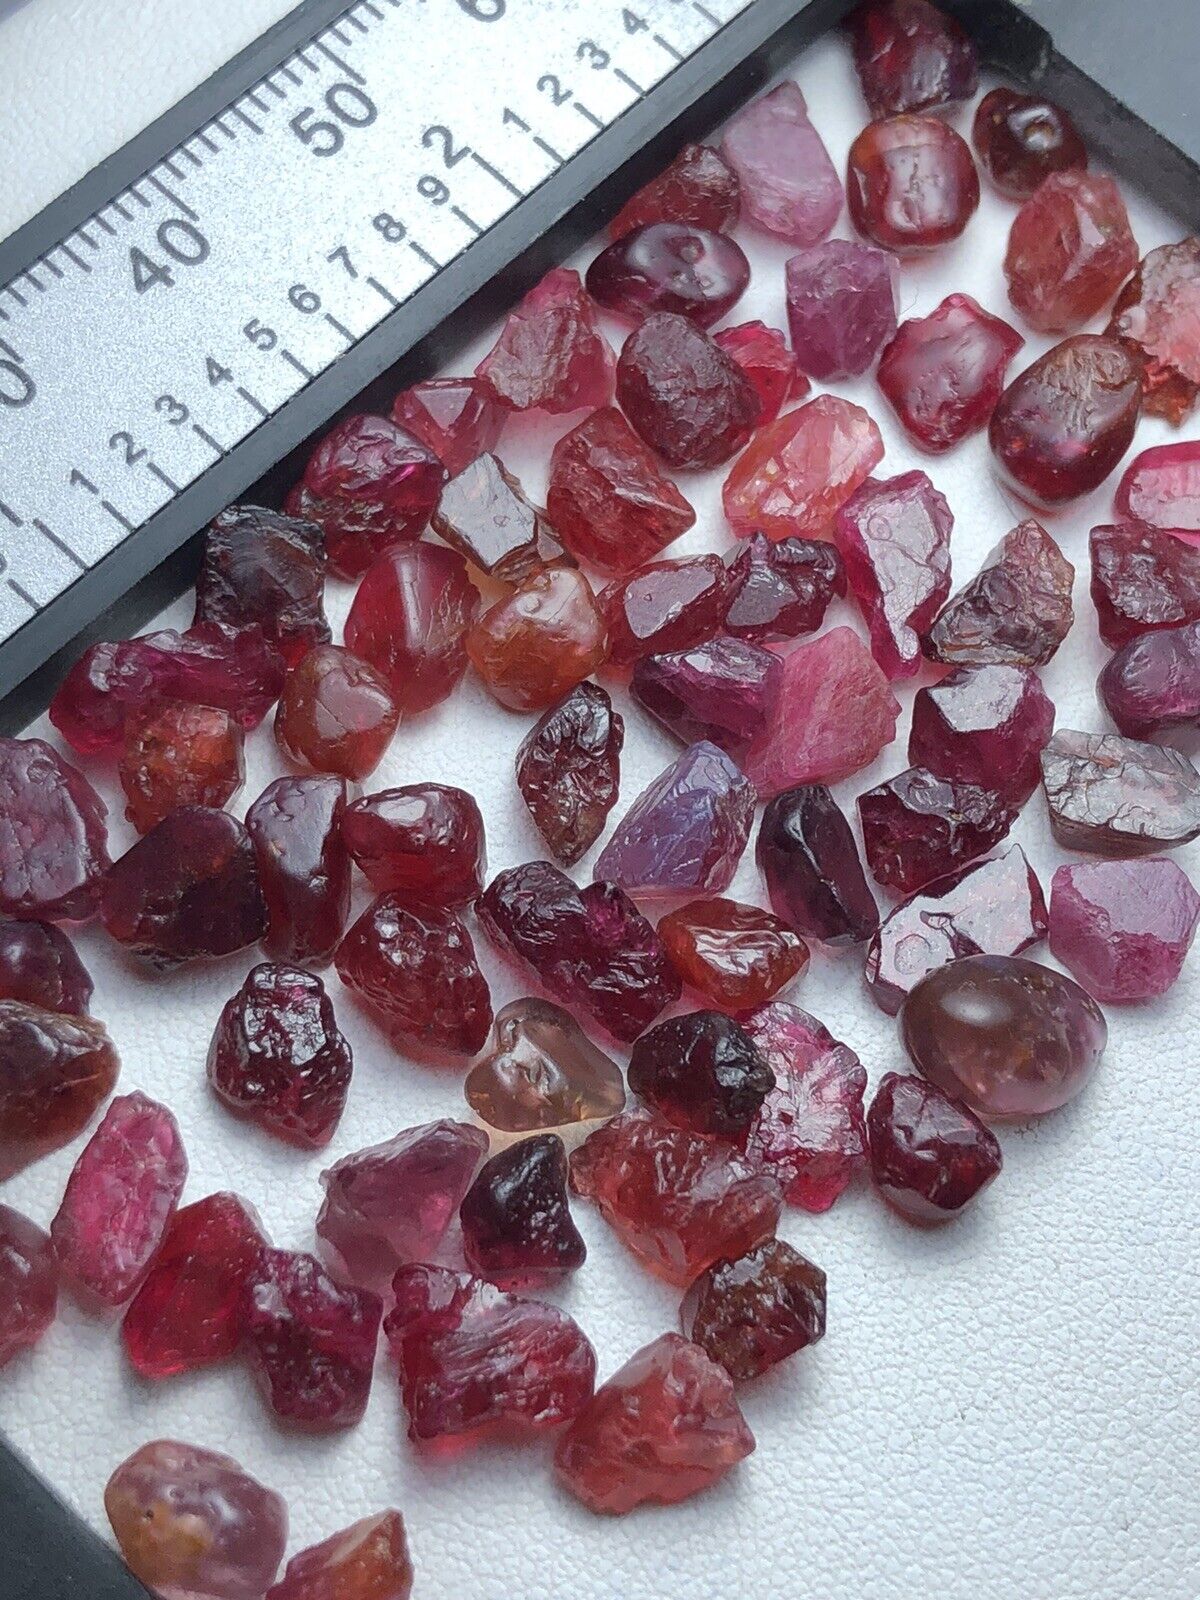 100 Crt / Natural Red Spinel Crystal Rough Mix Parcel,